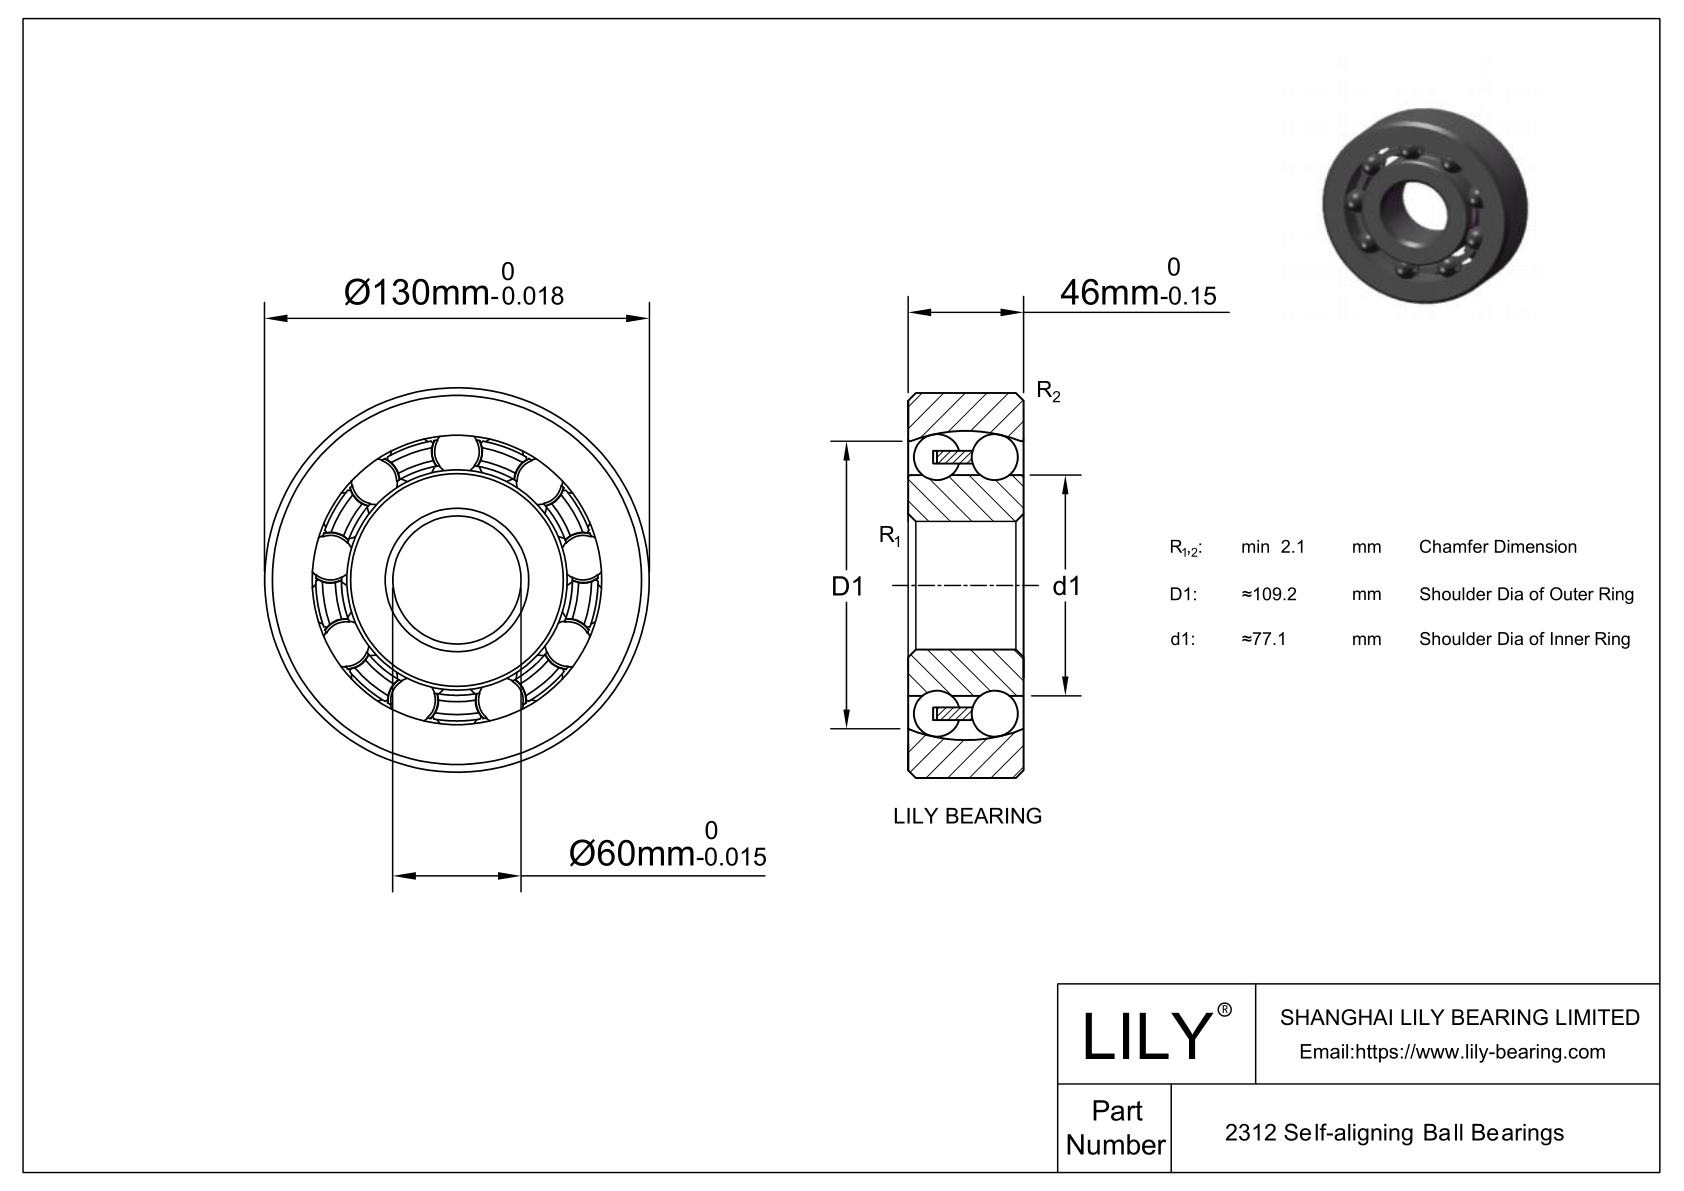 S2312 Stainless Steel Self Aligning Ball Bearings cad drawing